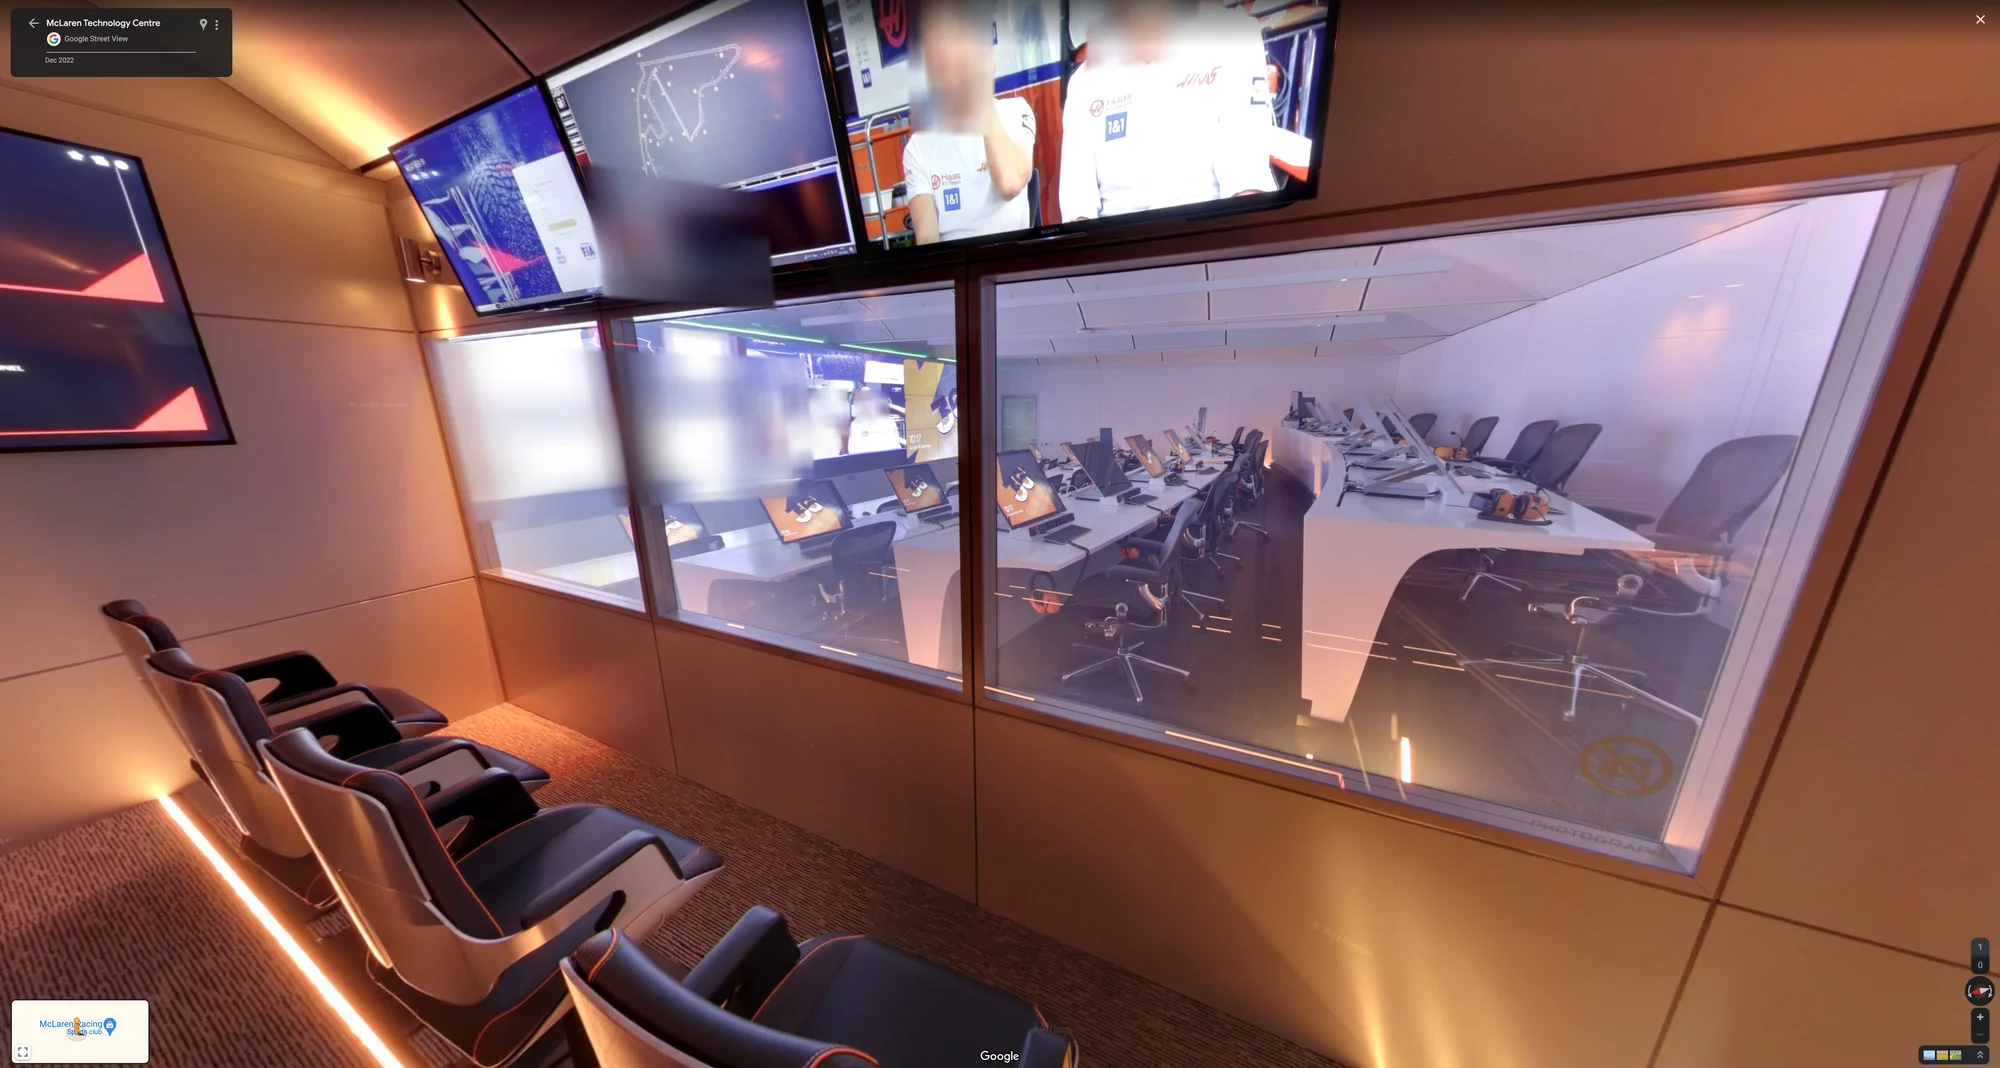 Street View imagery shows the inside of Mission Control at the McLaren Technology Center